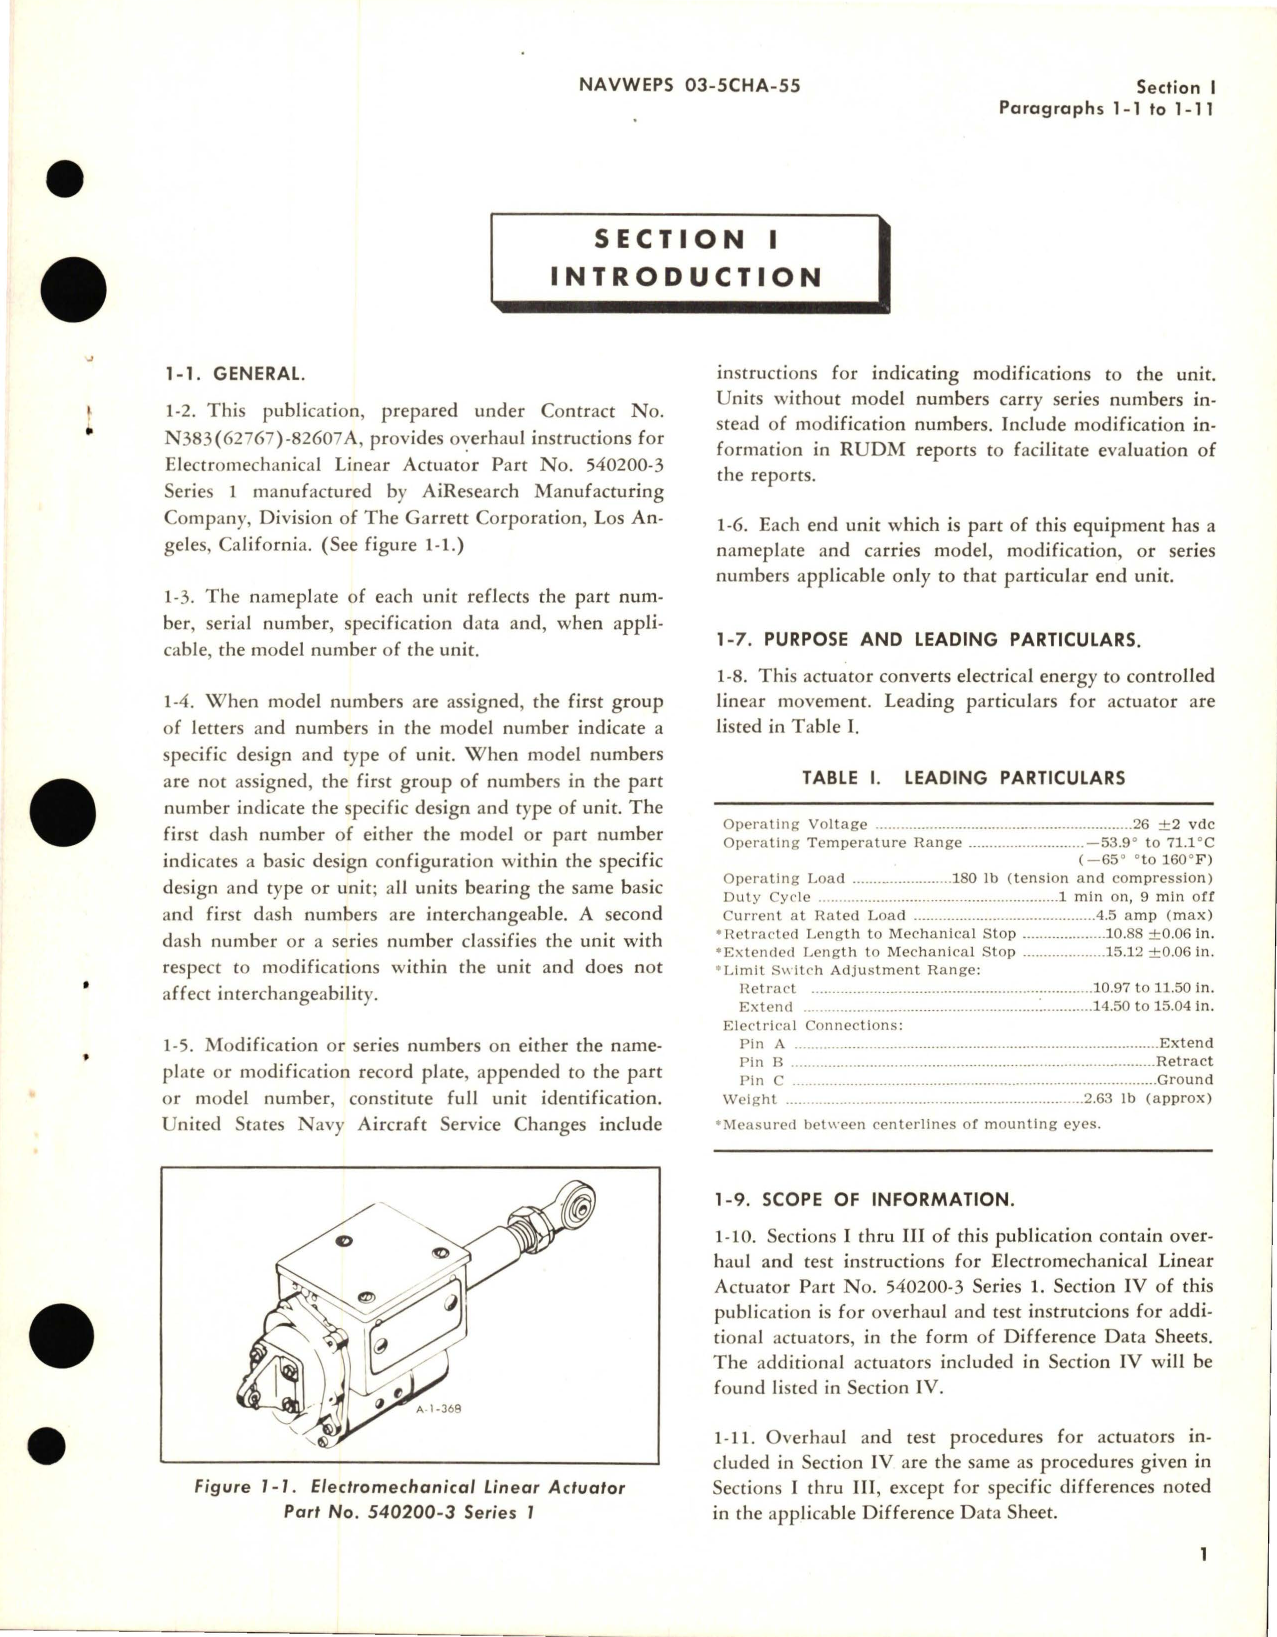 Sample page 5 from AirCorps Library document: Overhaul Instructions for Electromechanical Linear Actuator - Part 540200-3 